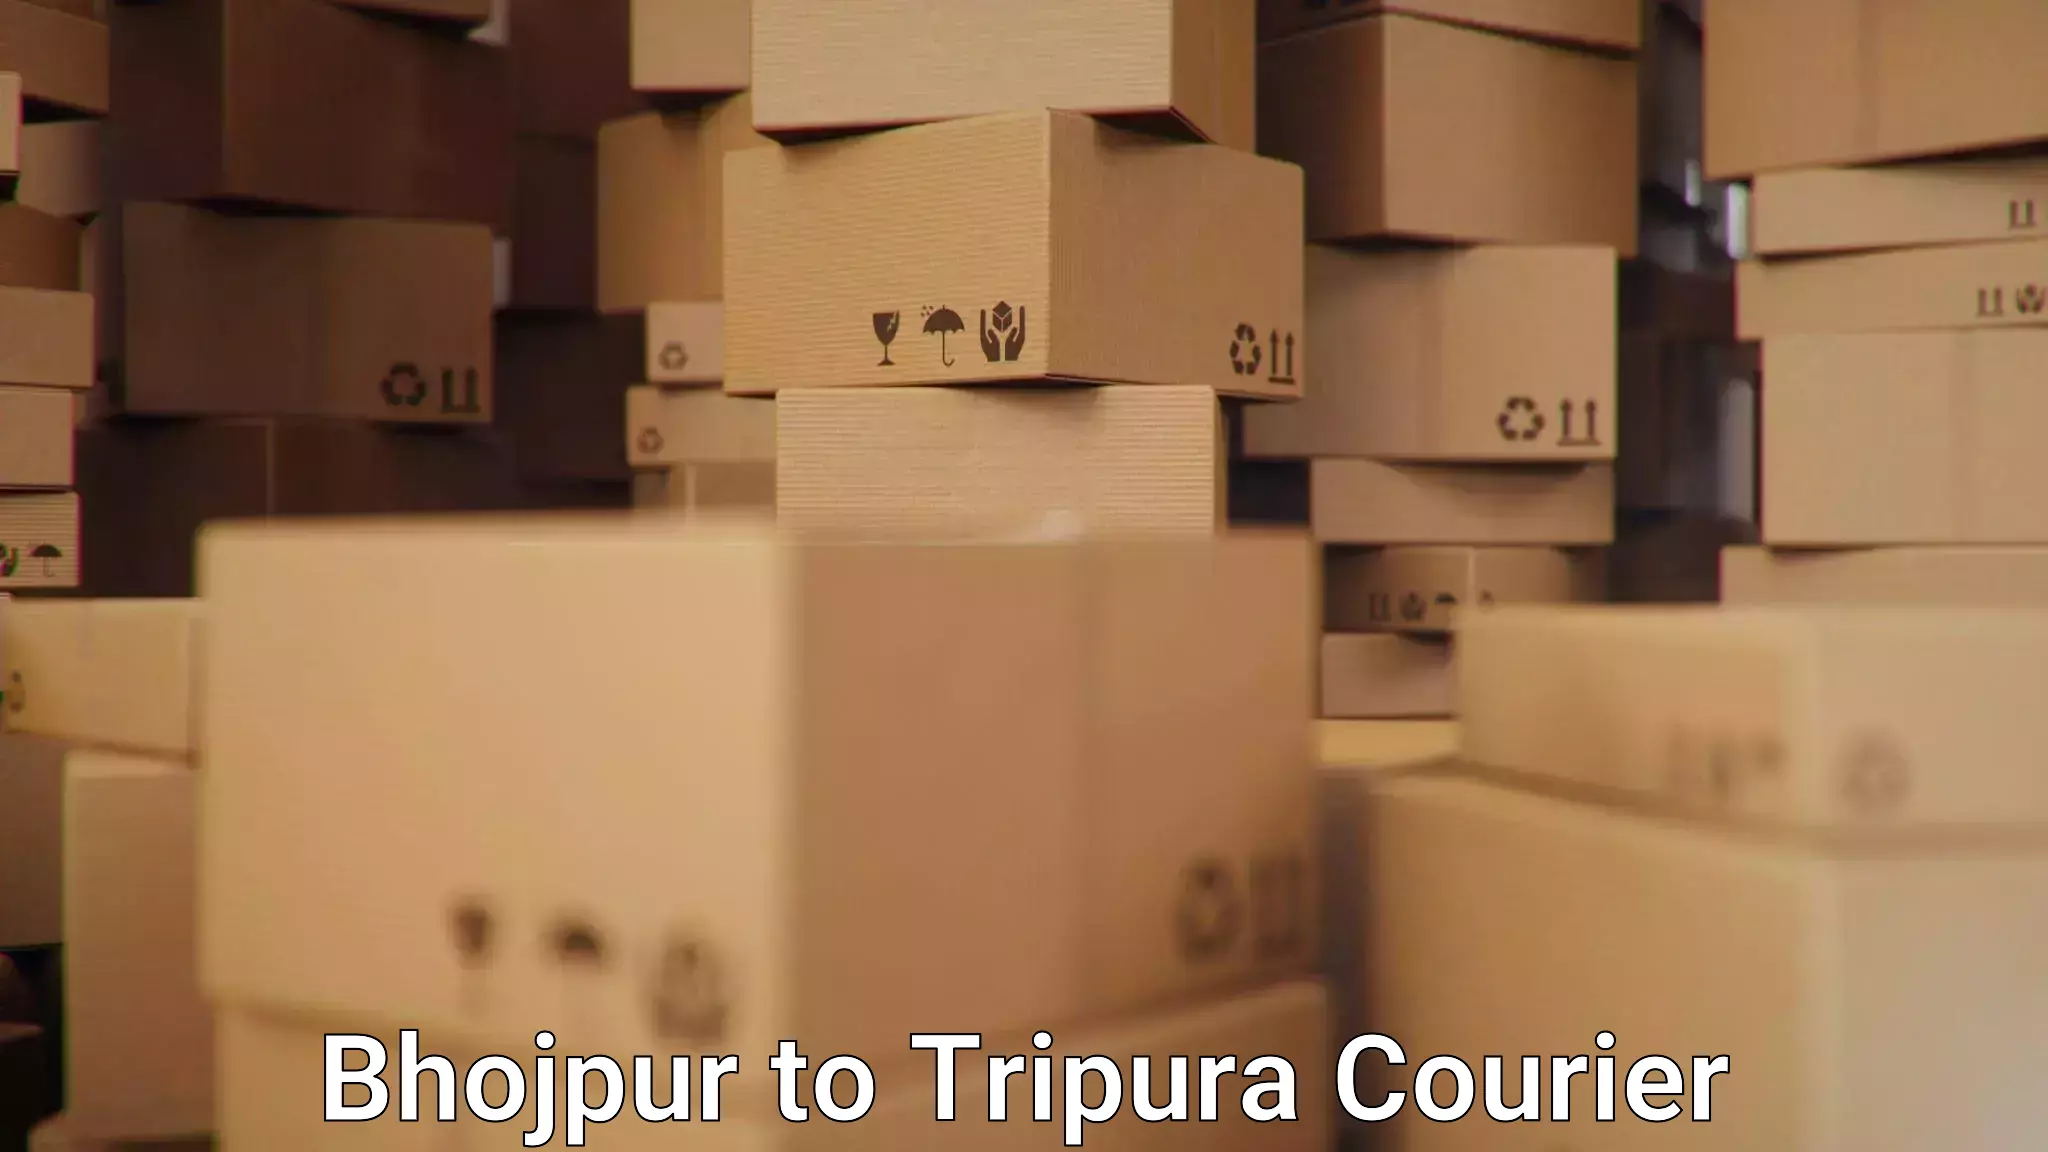 Tailored shipping plans Bhojpur to Udaipur Tripura